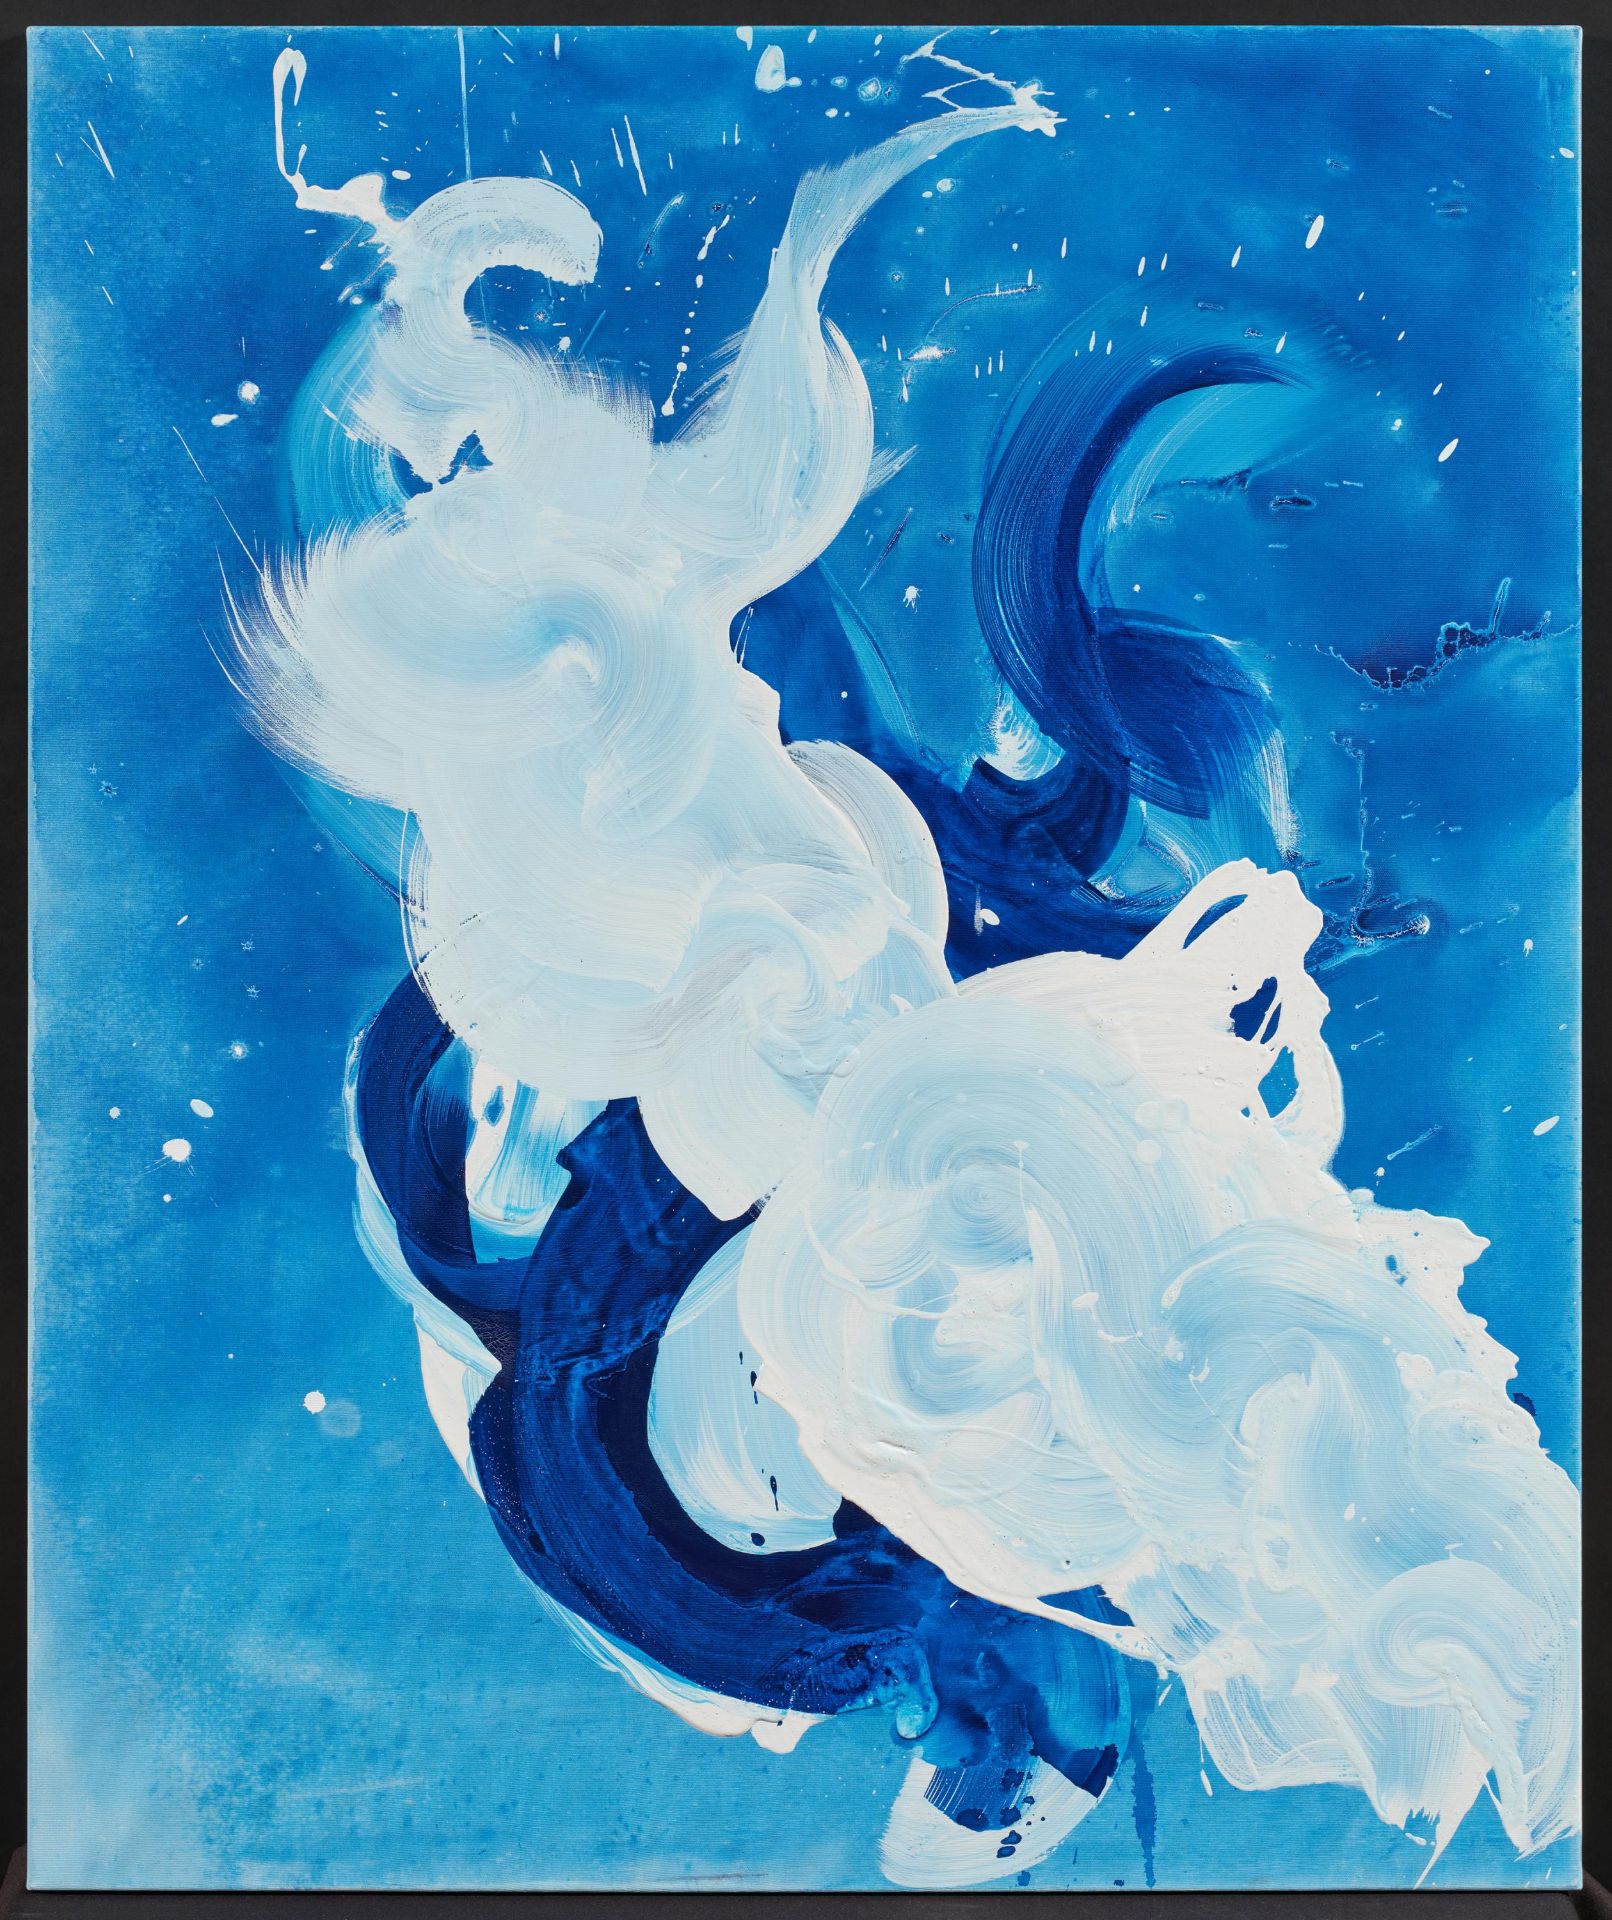 Conor Mccreedy: Blue and White Ocean - Image 6 of 8